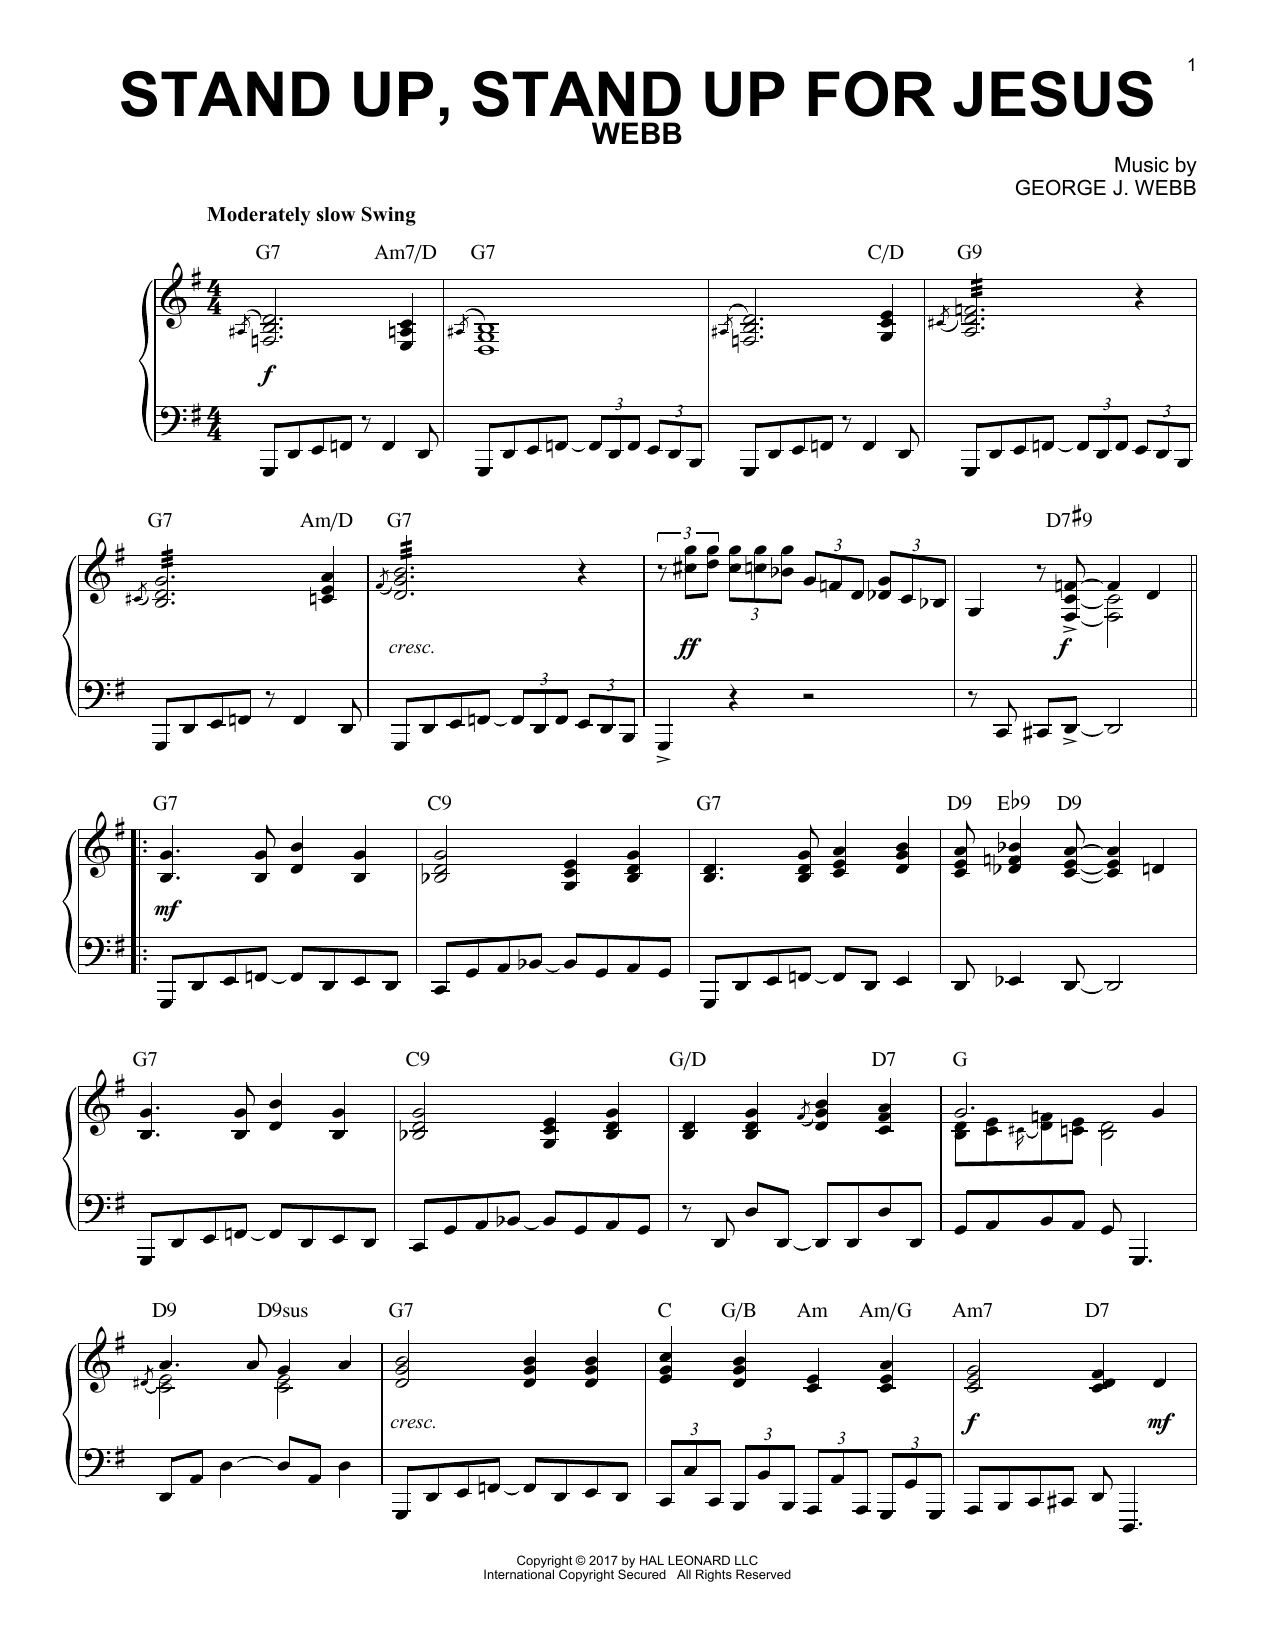 Stand Up, Stand Up For Jesus [Jazz version] sheet music